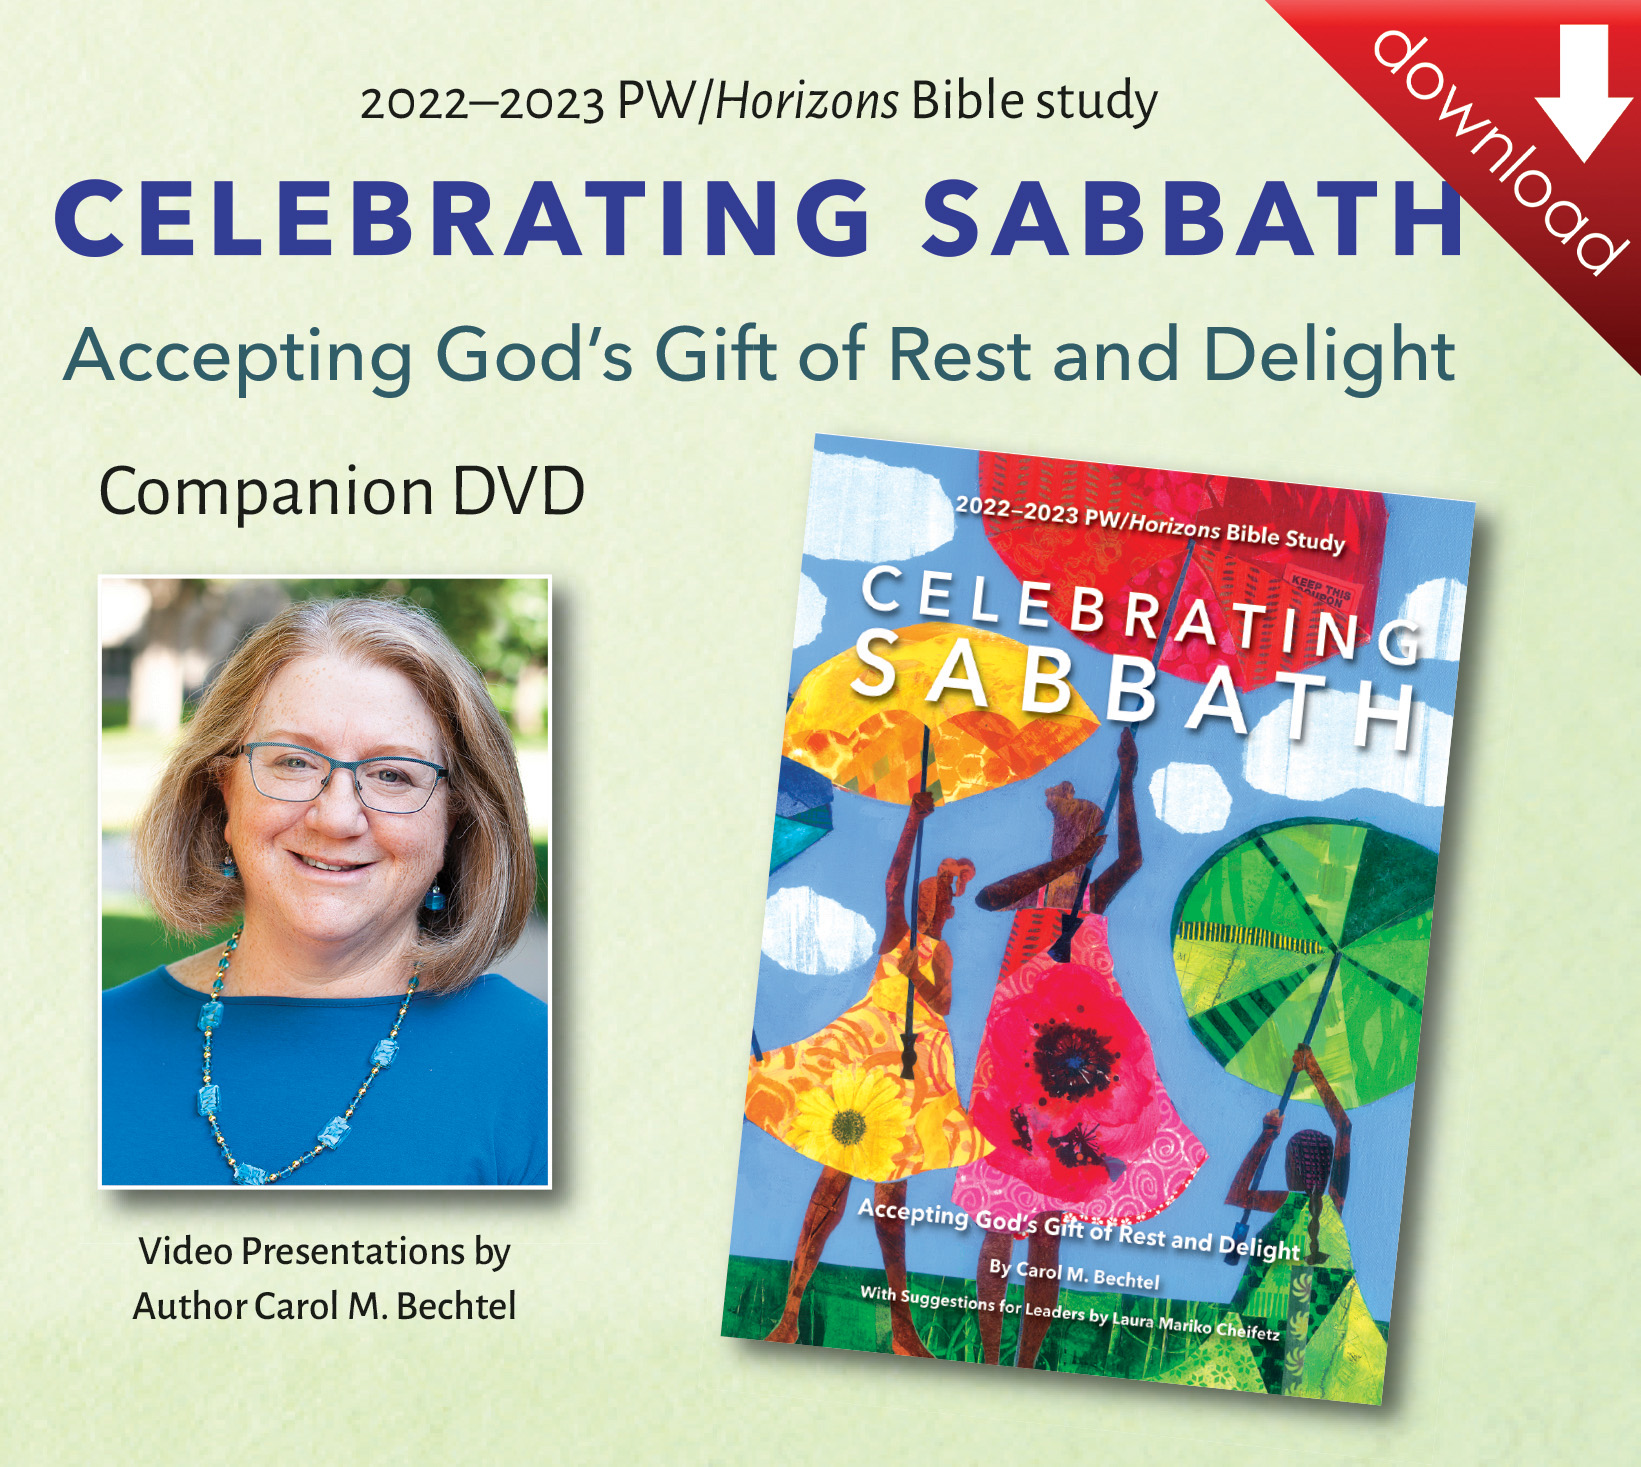 Celebrating Sabbath: Accepting God's Gift of Rest and Delight Companion DVD Download